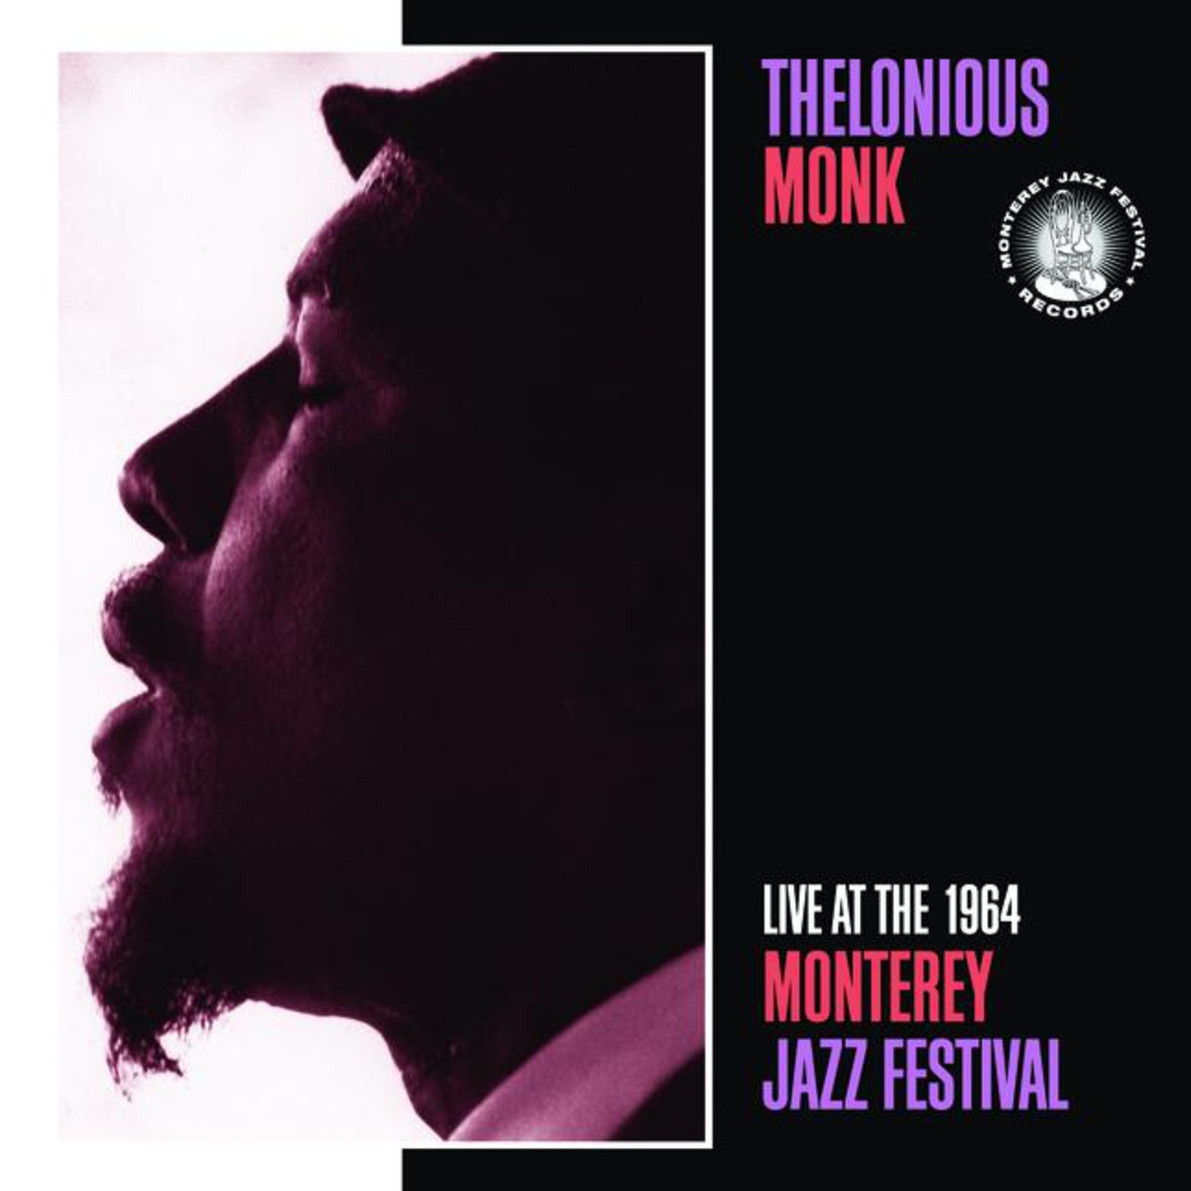 Live At The 1964 Monterey Jazz Festival